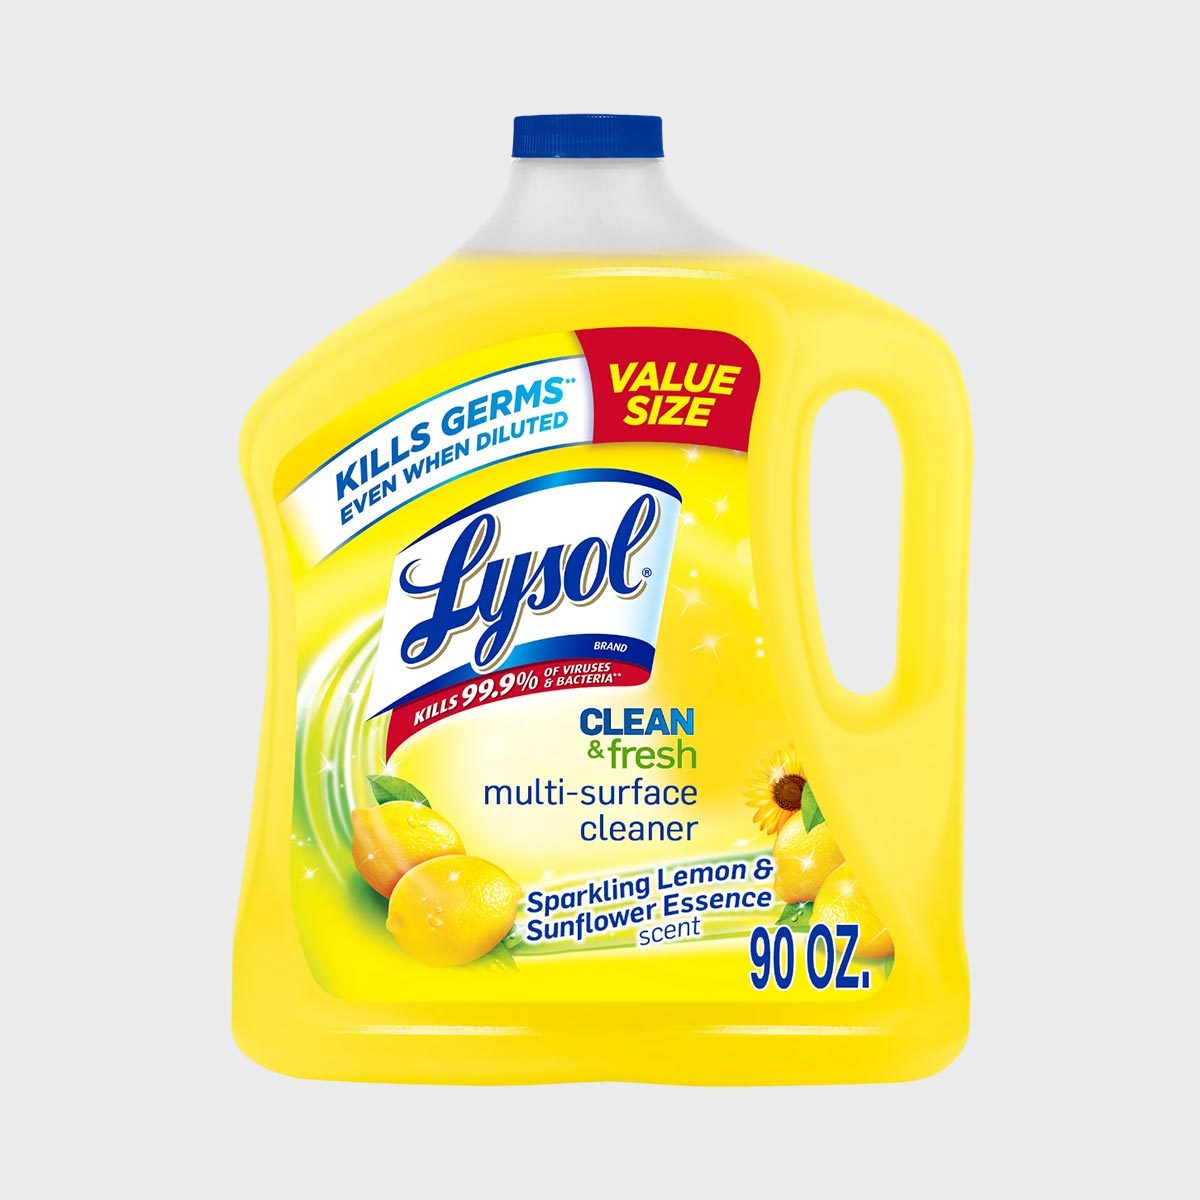 https://www.rd.com/wp-content/uploads/2023/04/Lysol-Clean-and-Fresh-Multi-Surface-Cleaner_ecomm_via-walmart.com_.jpg?fit=700%2C700